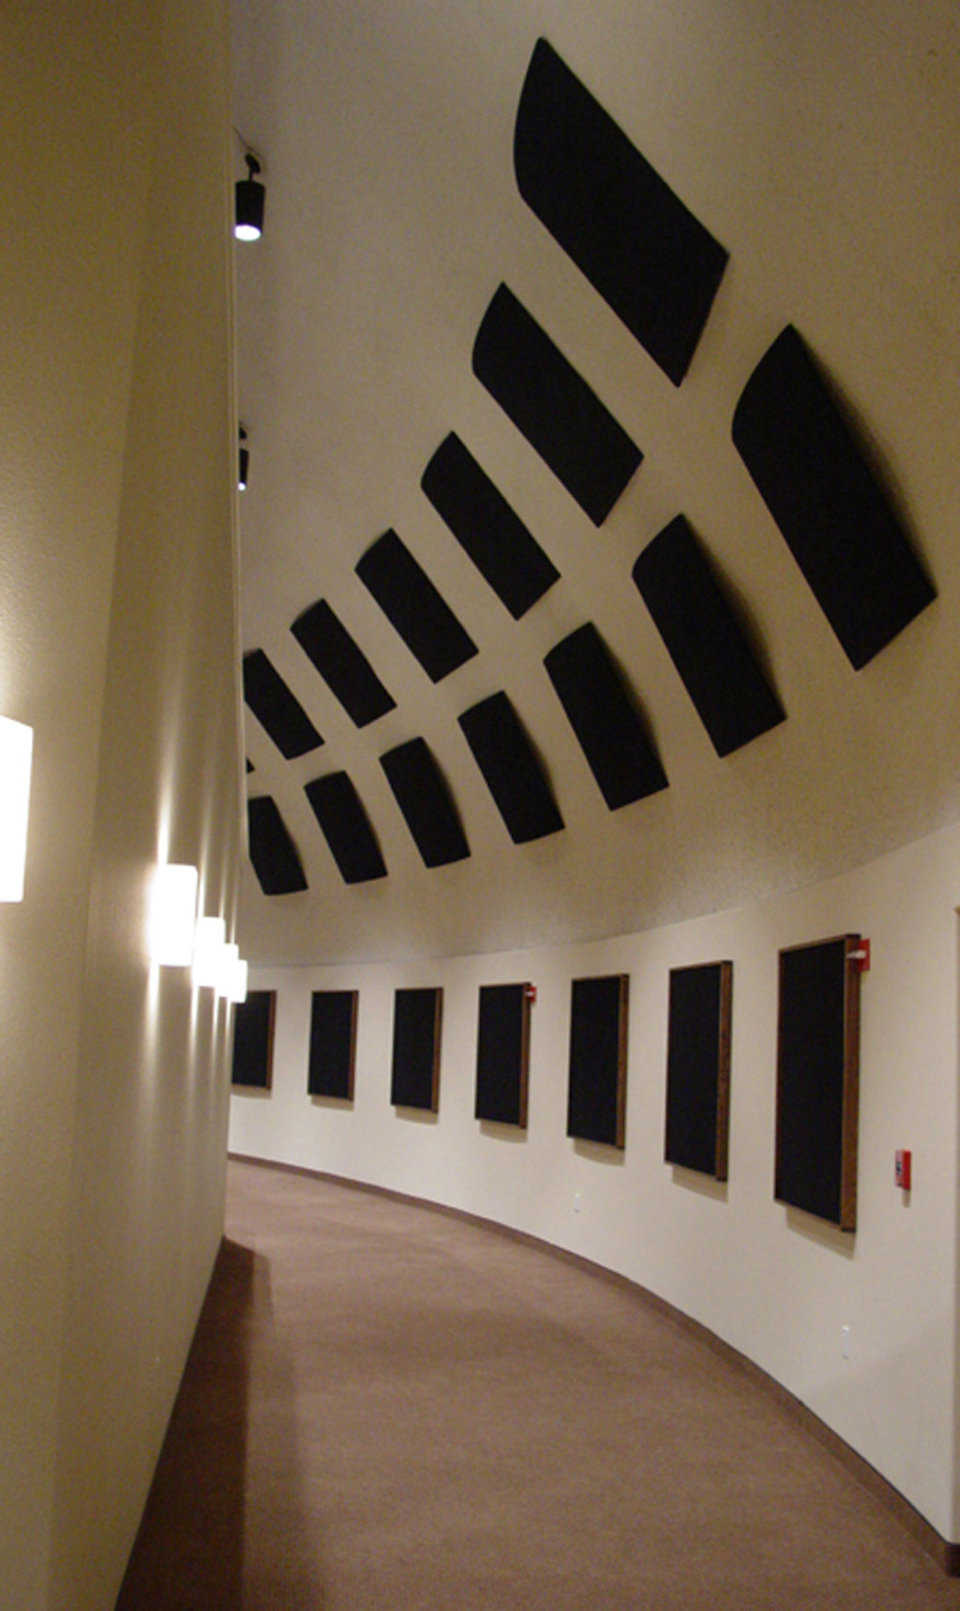 Acoustics — Special panels absorb unwanted echoes.